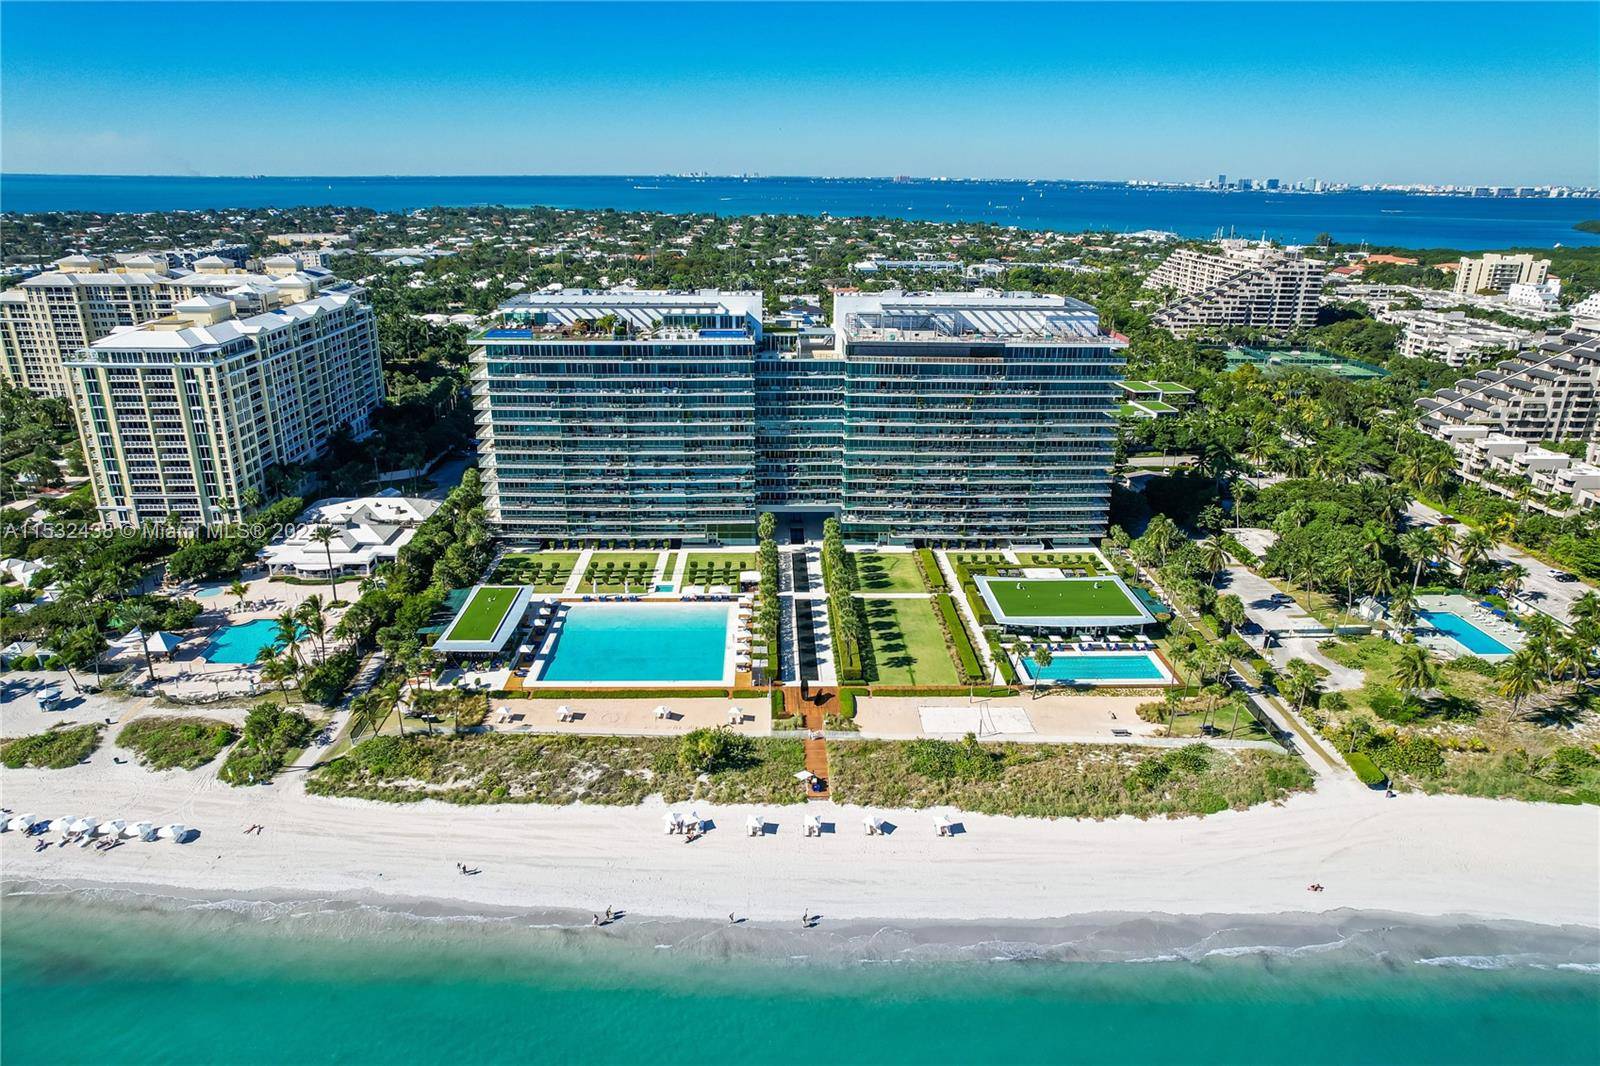 Welcome to your dream home at Oceana Key Biscayne, a mesmerizing seaside escape that defines unparalleled luxury and tranquility.